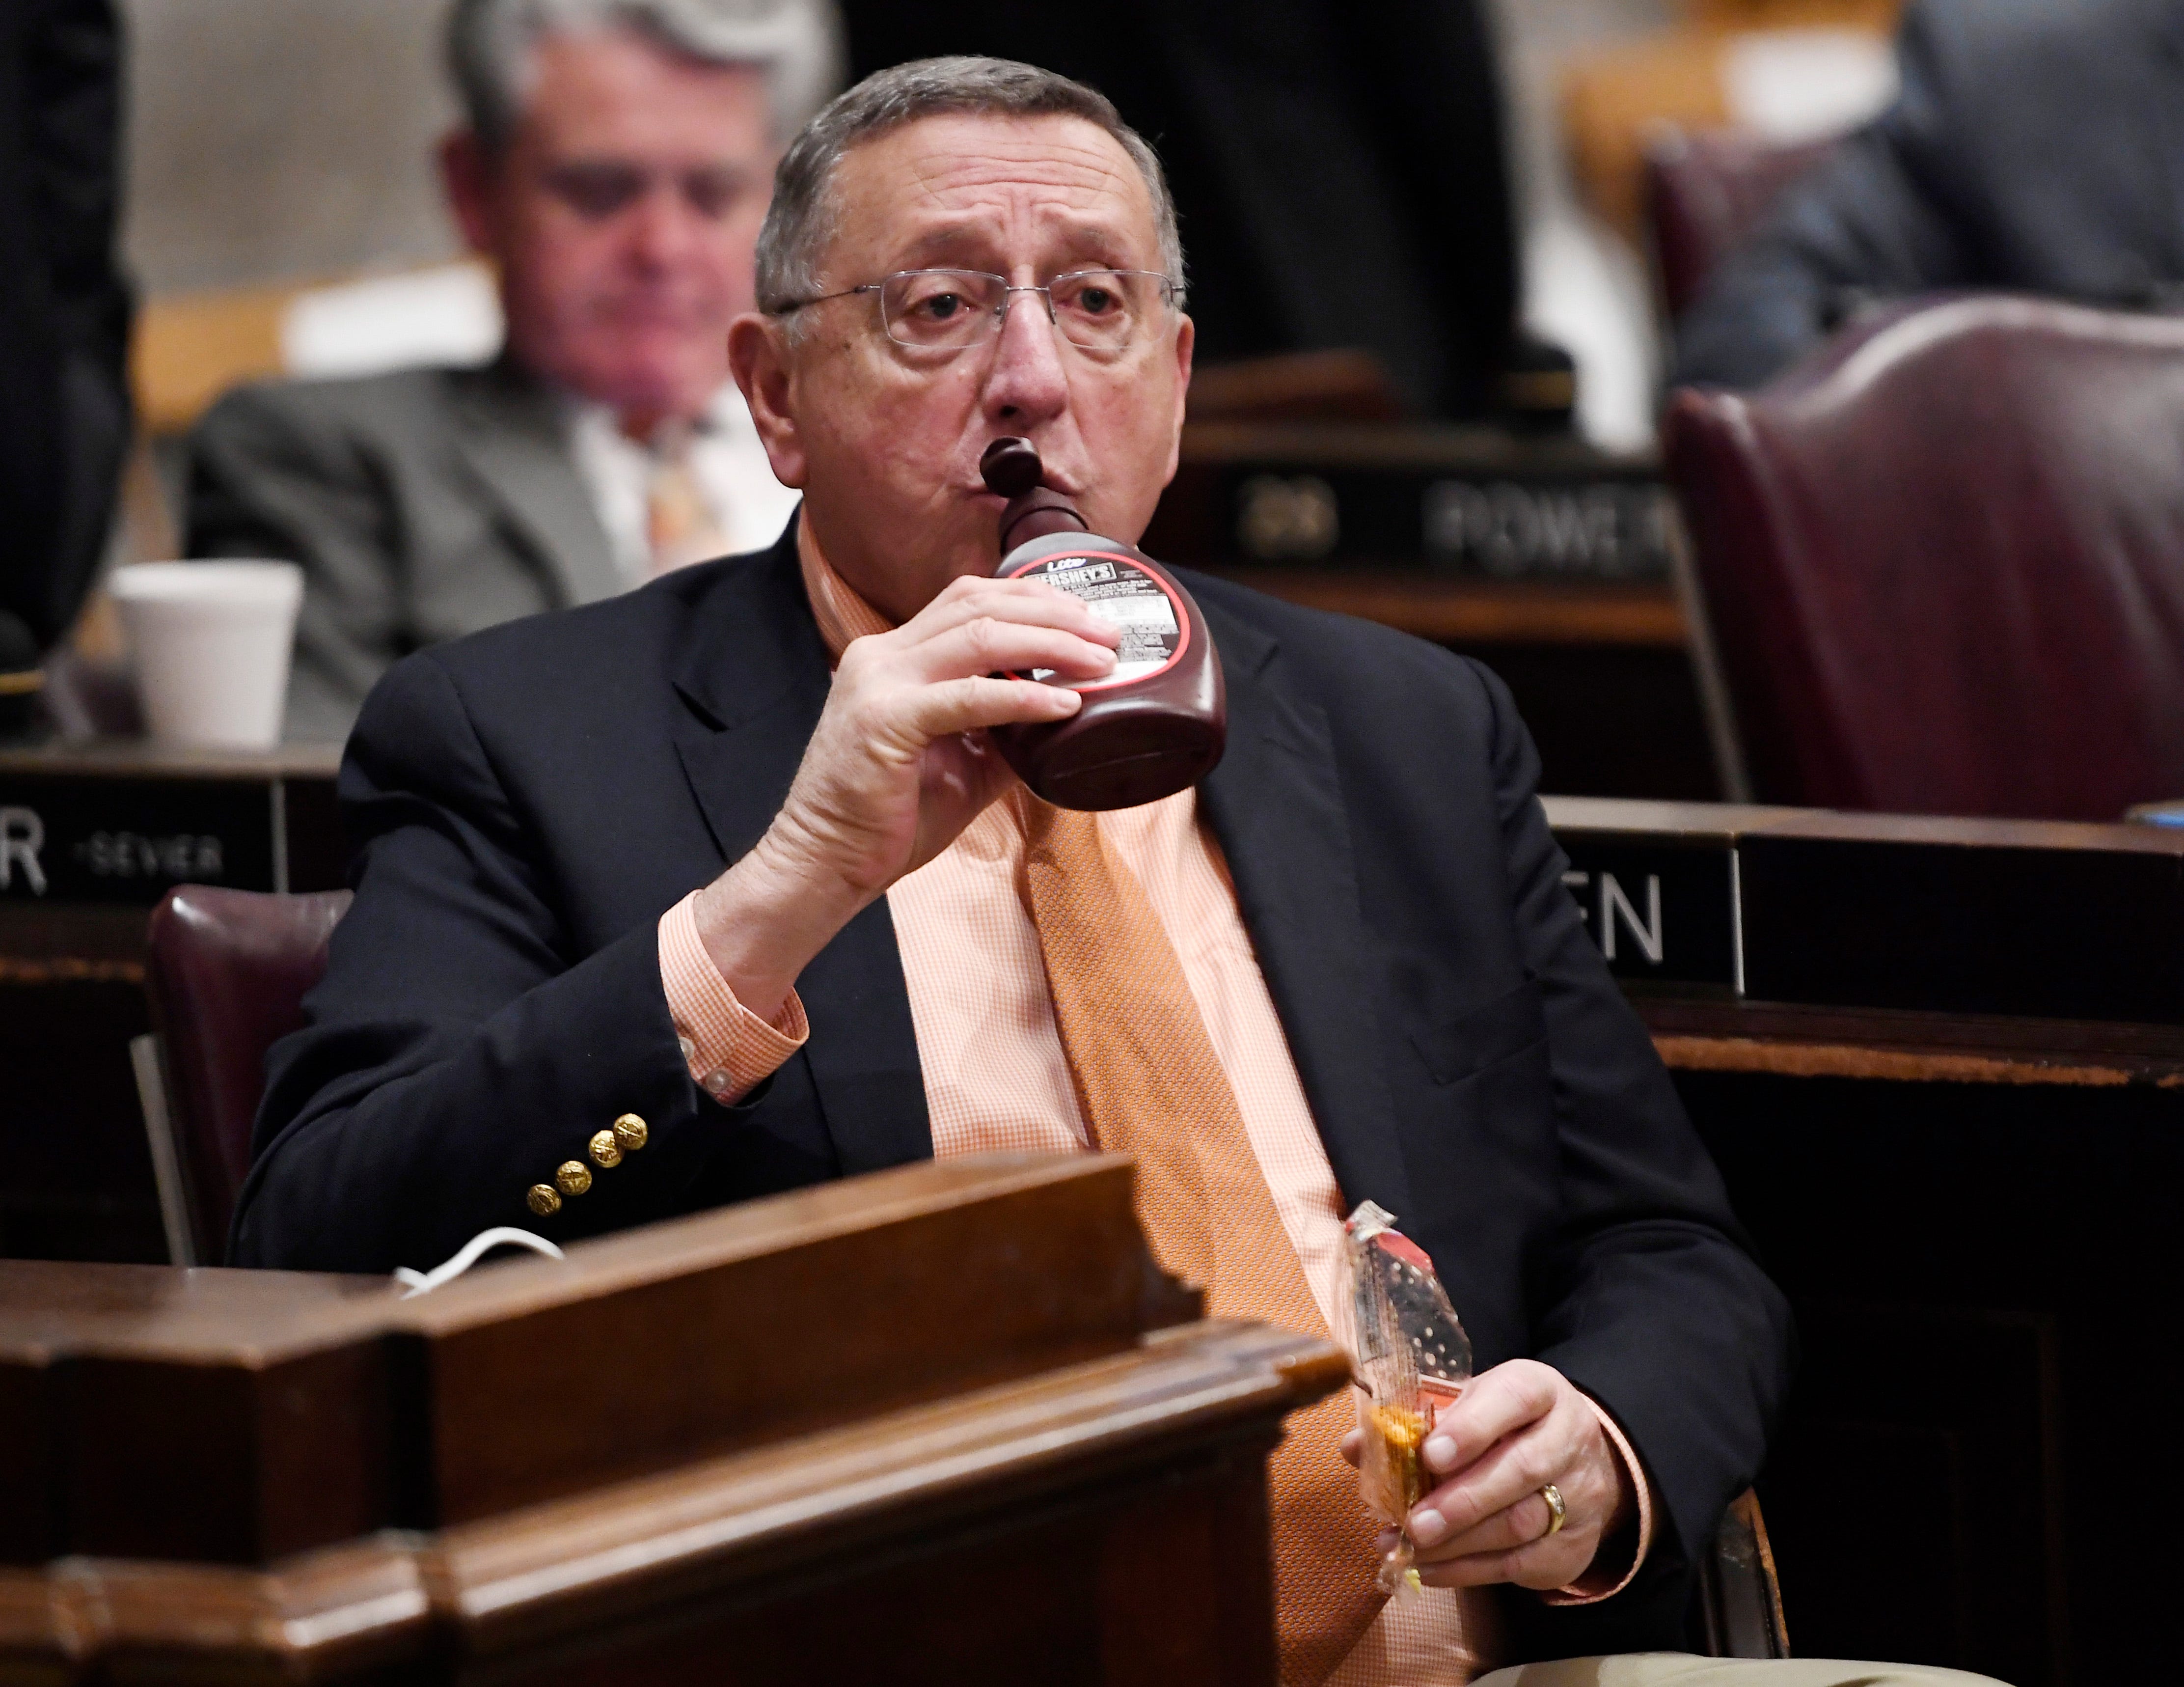 Rep. Kent Calfee, R-Kingston, drinks out of a chocolate syrup bottle as he waits for the start of the State of the State address at the state Capitol Monday, Feb. 3, 2020 in Nashville, Tenn.